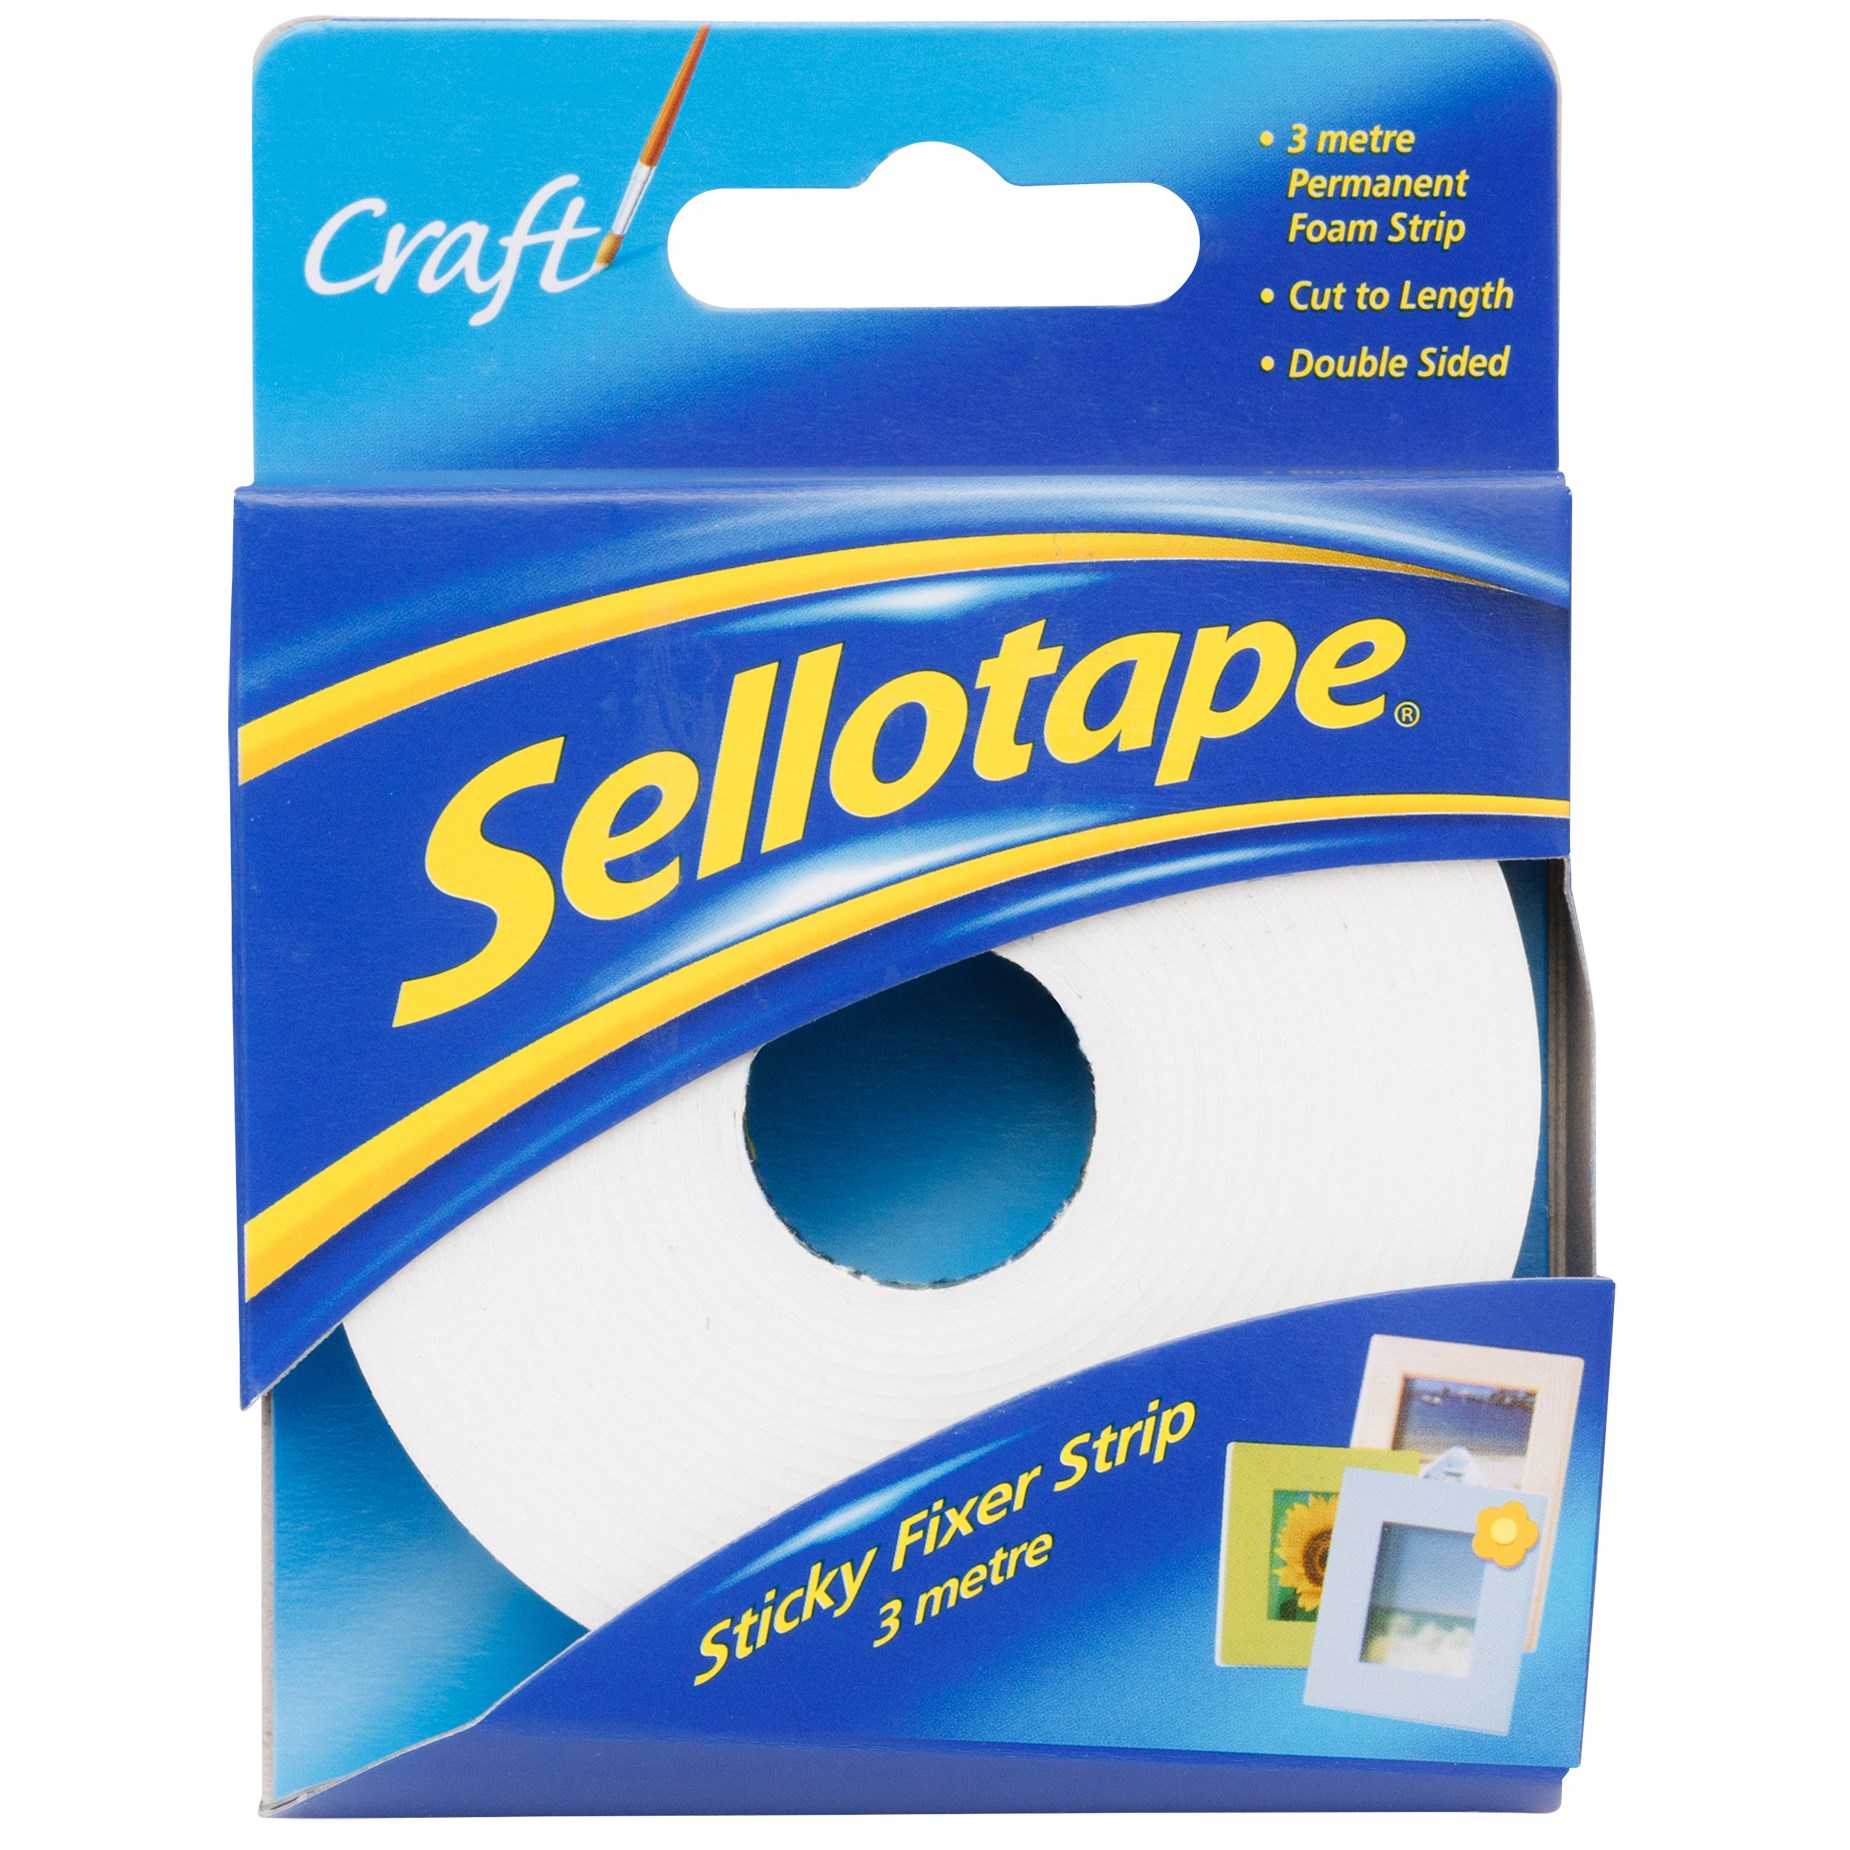 Sellotape Double Sided Tape Roll